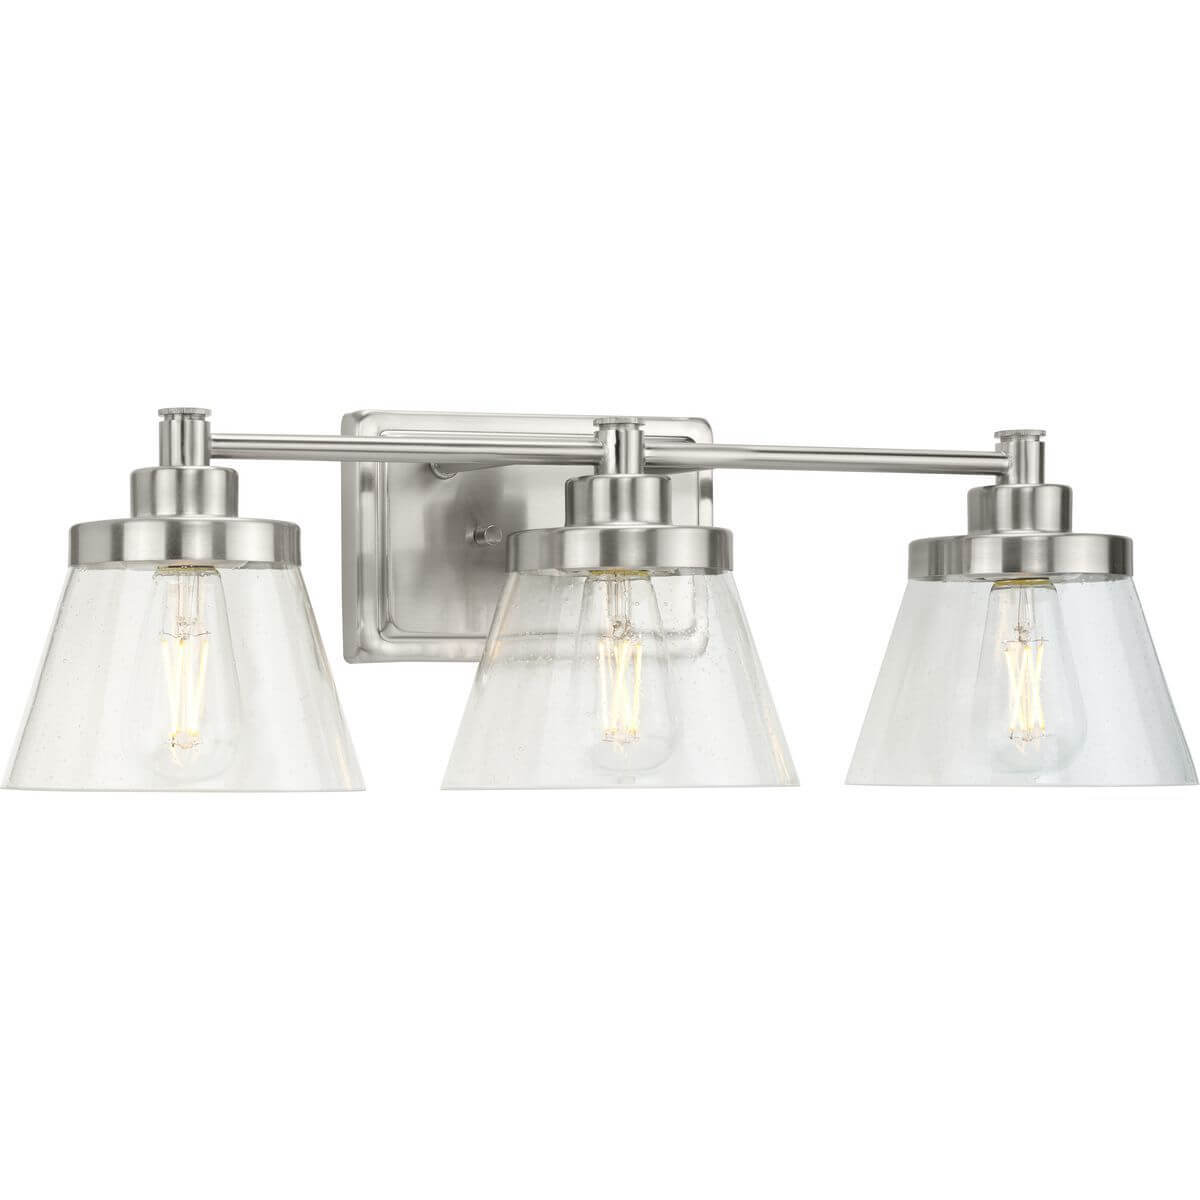 Progress Lighting Hinton 3 Light 25 inch Bath Vanity Light in Brushed Nickel with Clear Seeded Glass P300350-009